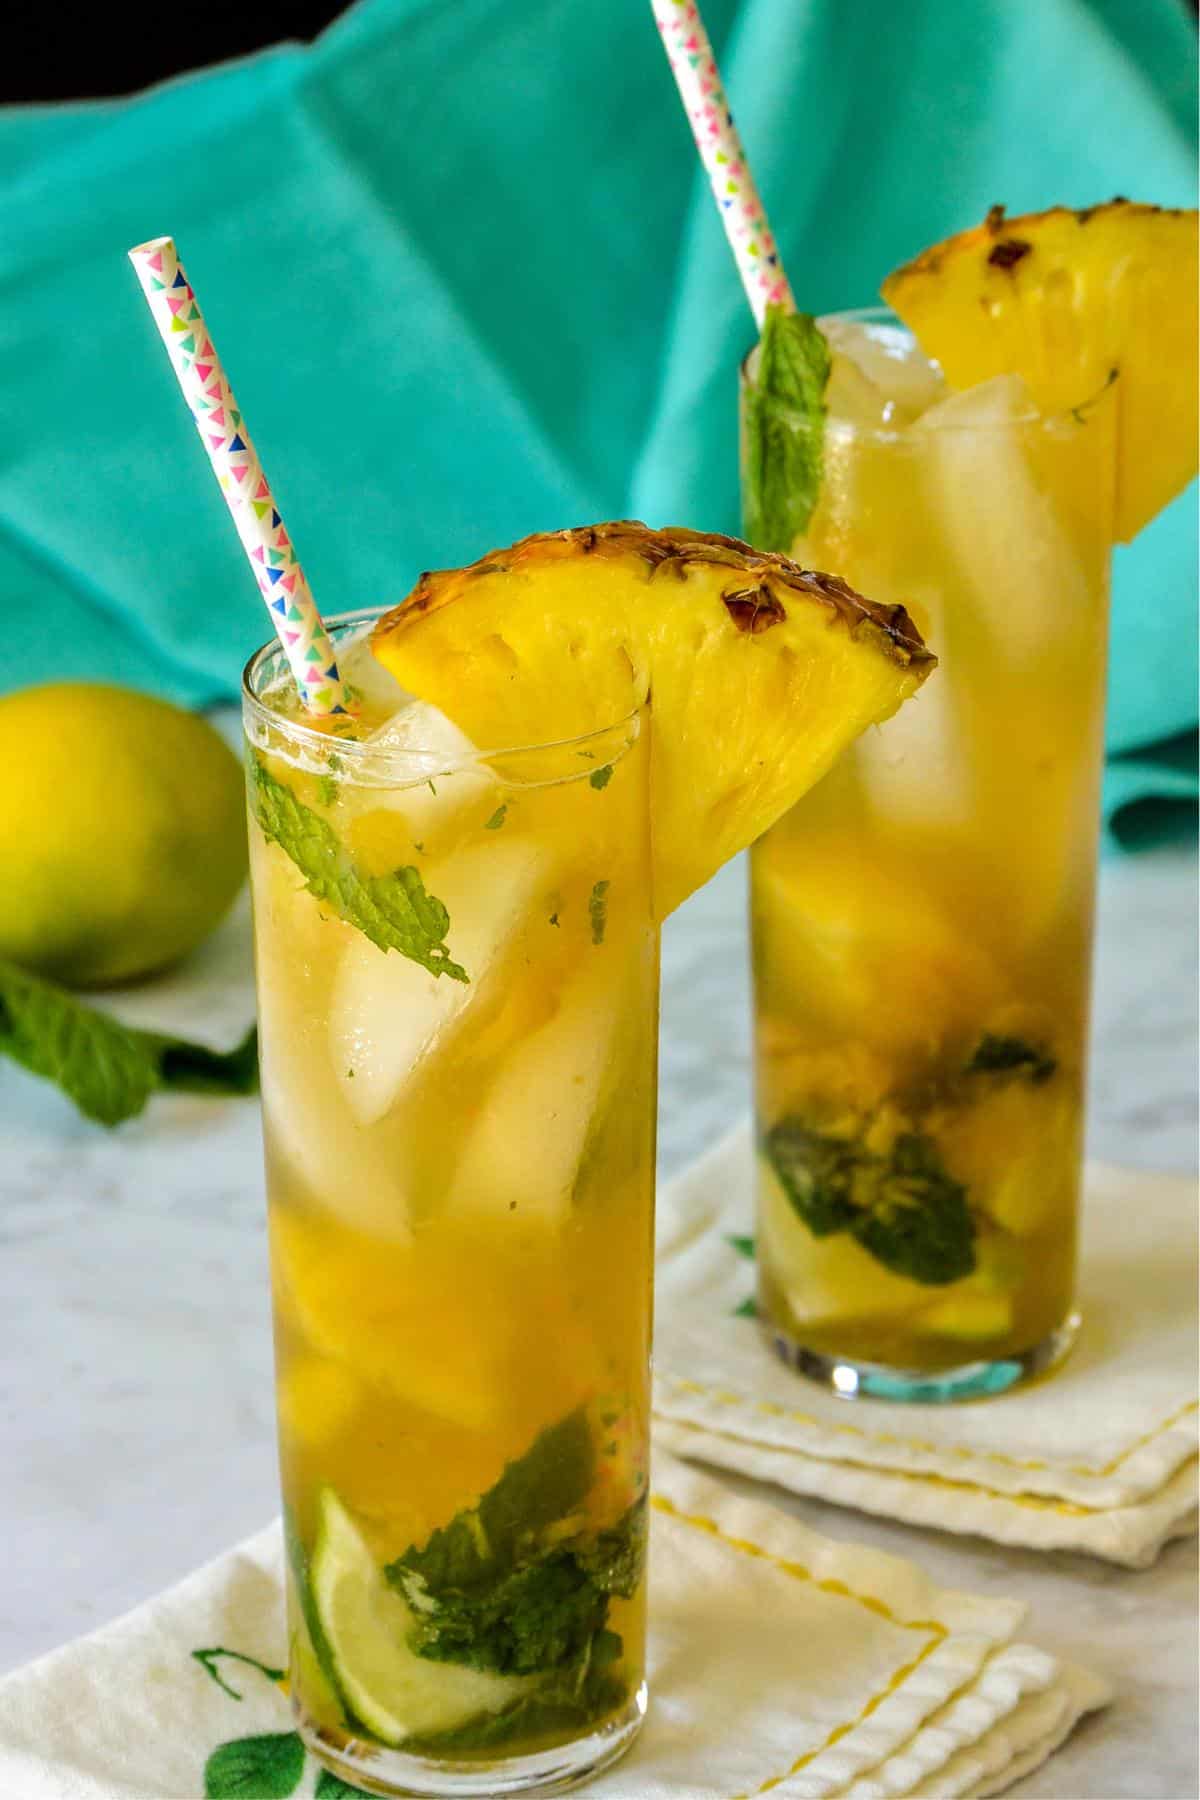 Tall glasses of pineapple mojitos with straws and pineapple wedge garnishes.